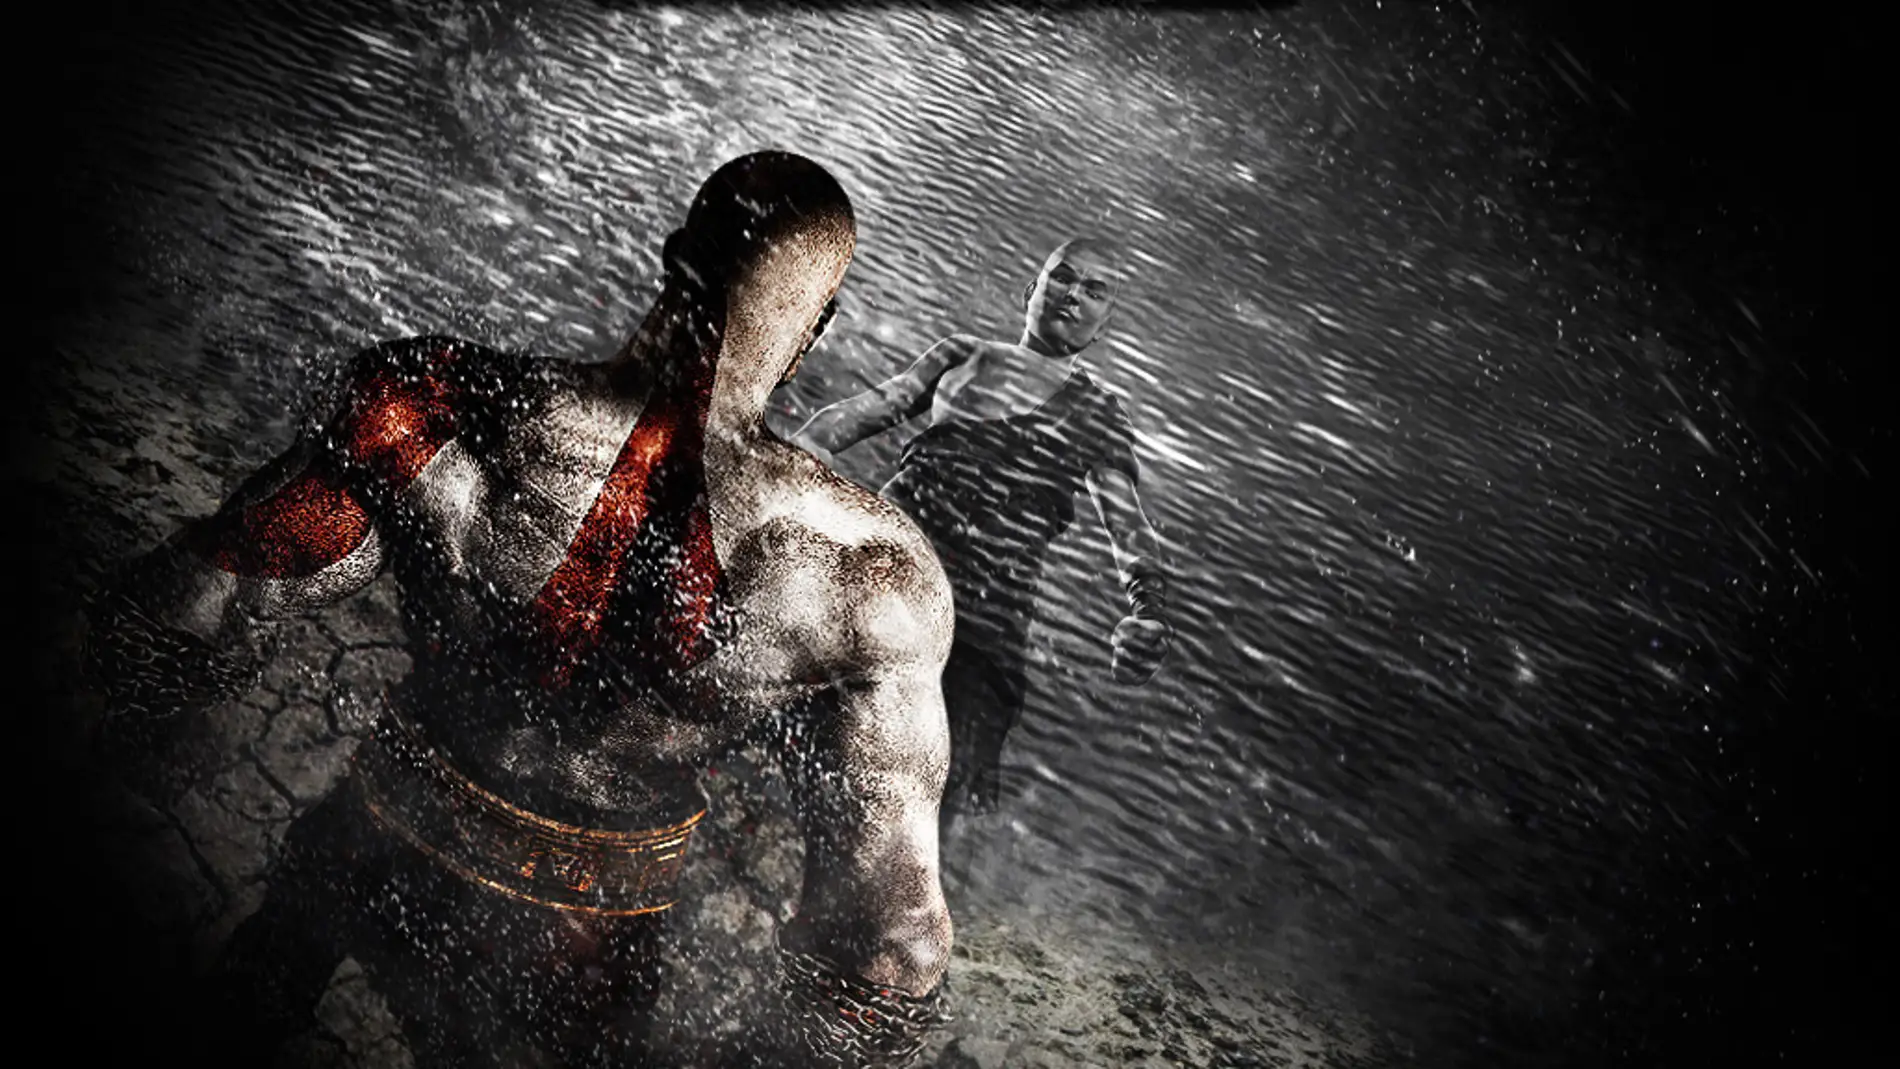 God of war Ghost of Sparta